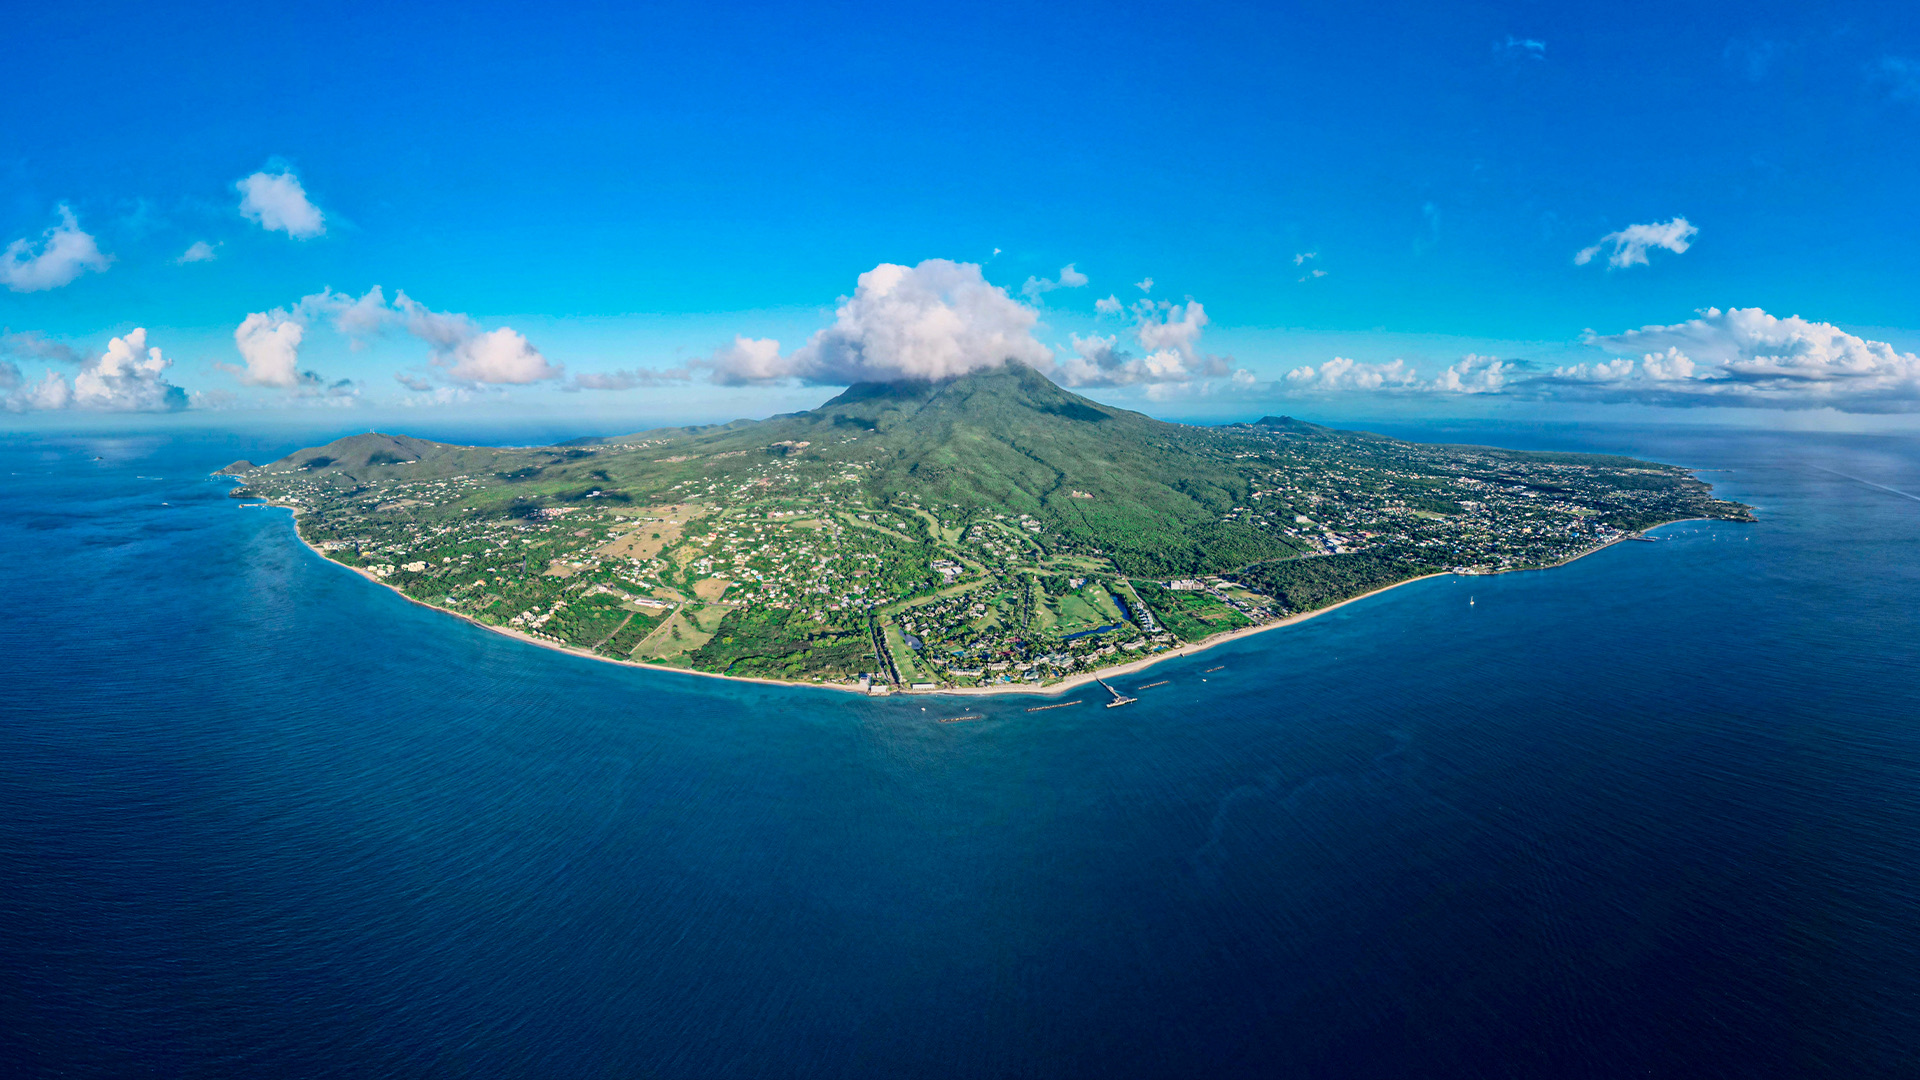 Aerial view of the island with clouds covering the top of the mountain.